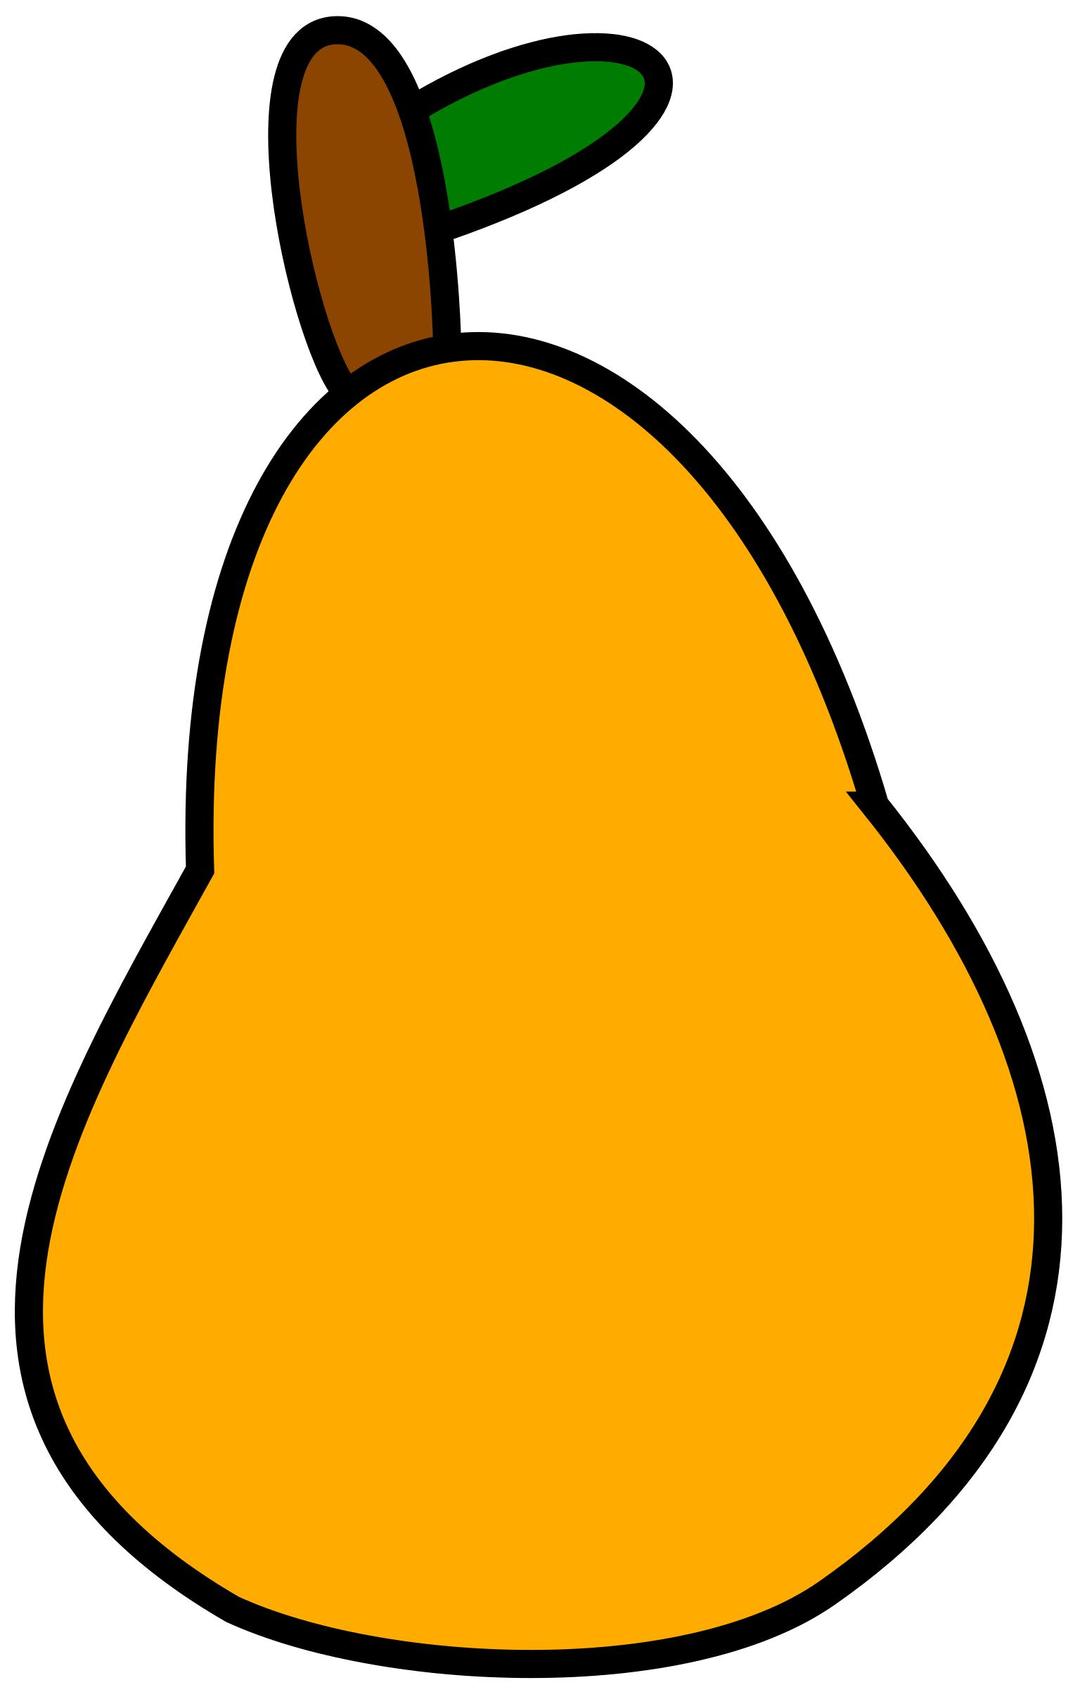 Very simple pear png transparent